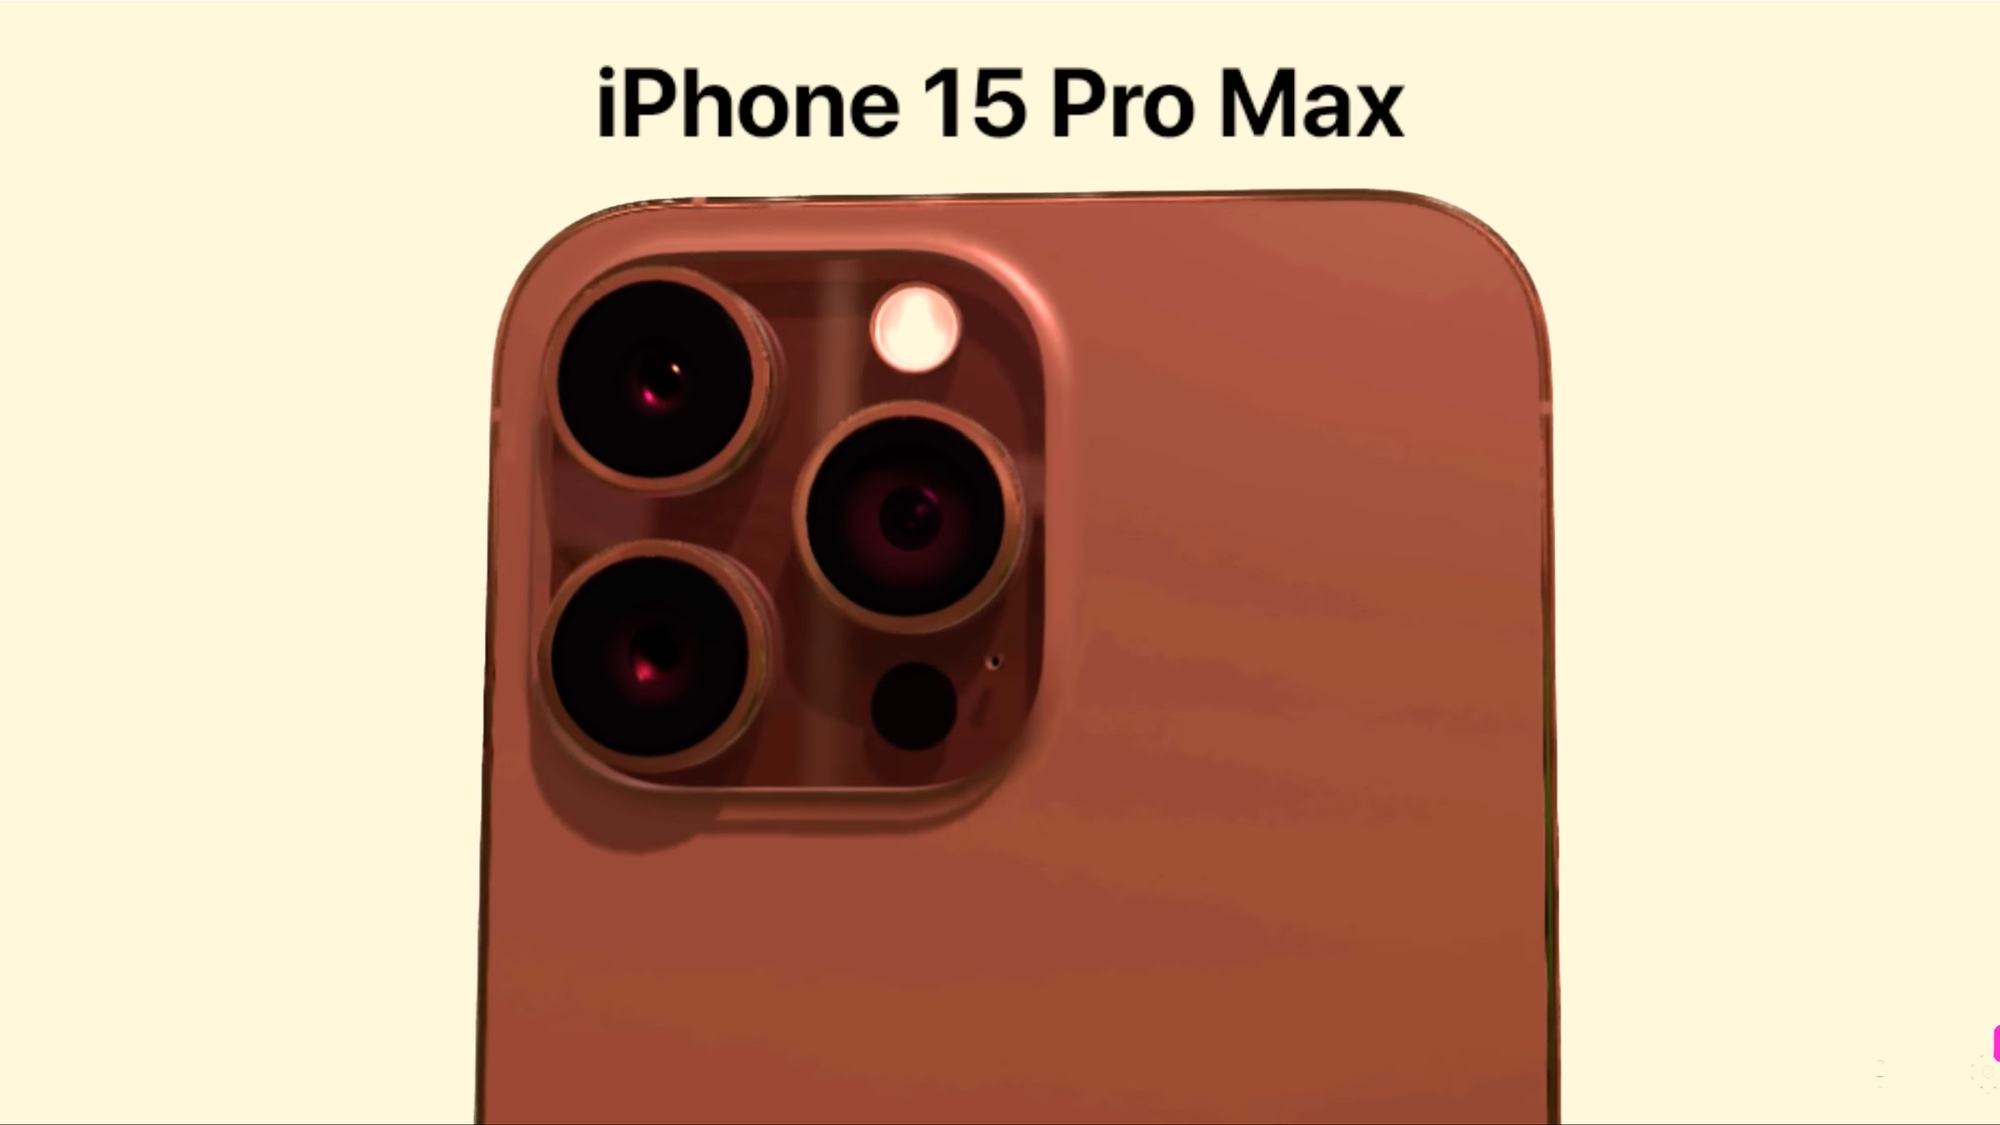 iPhone 15 Pro Max renders by Alpha Tech